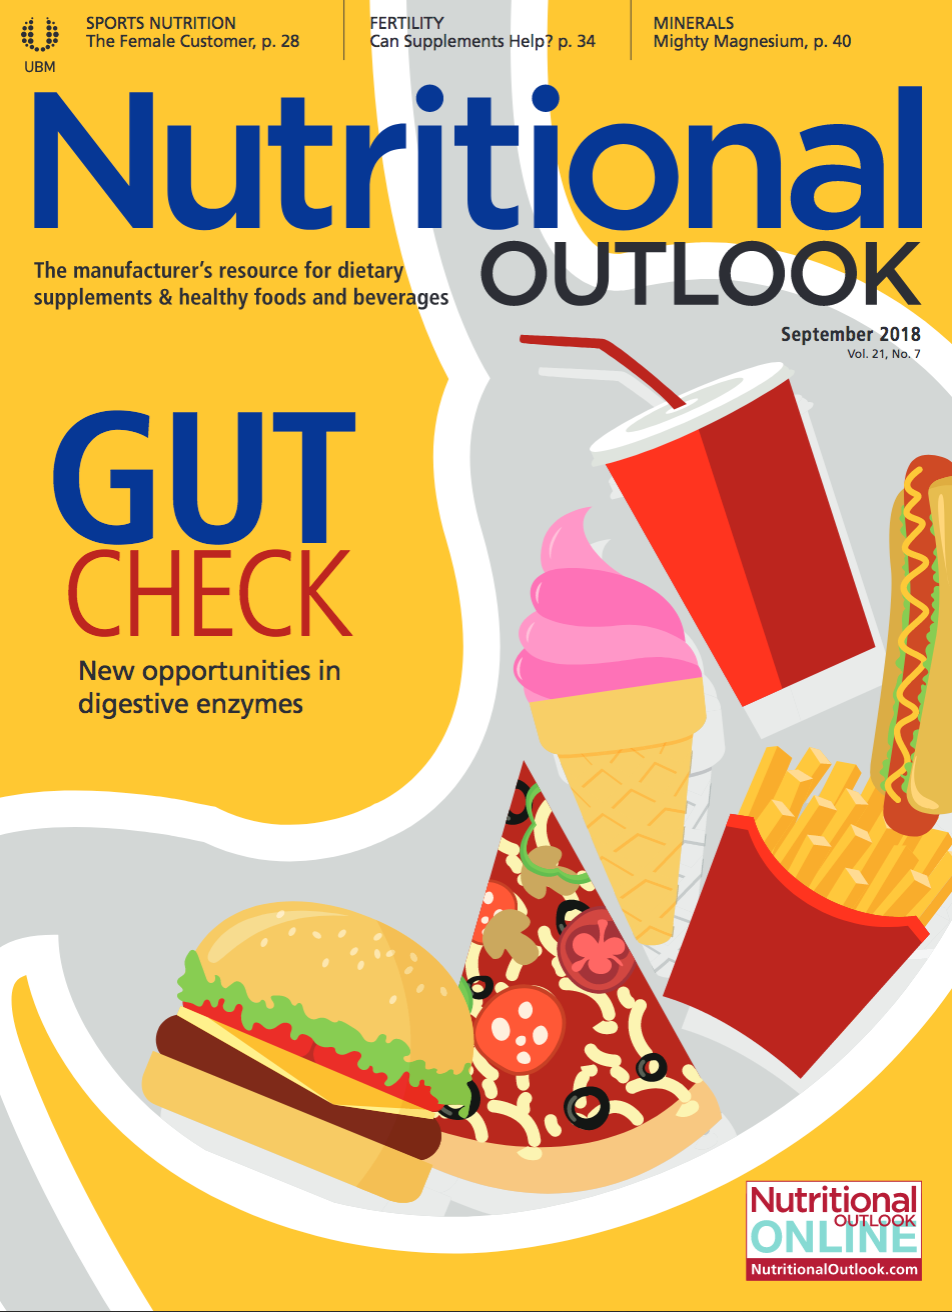 Nutritional Outlook Vol. 21 No. 7